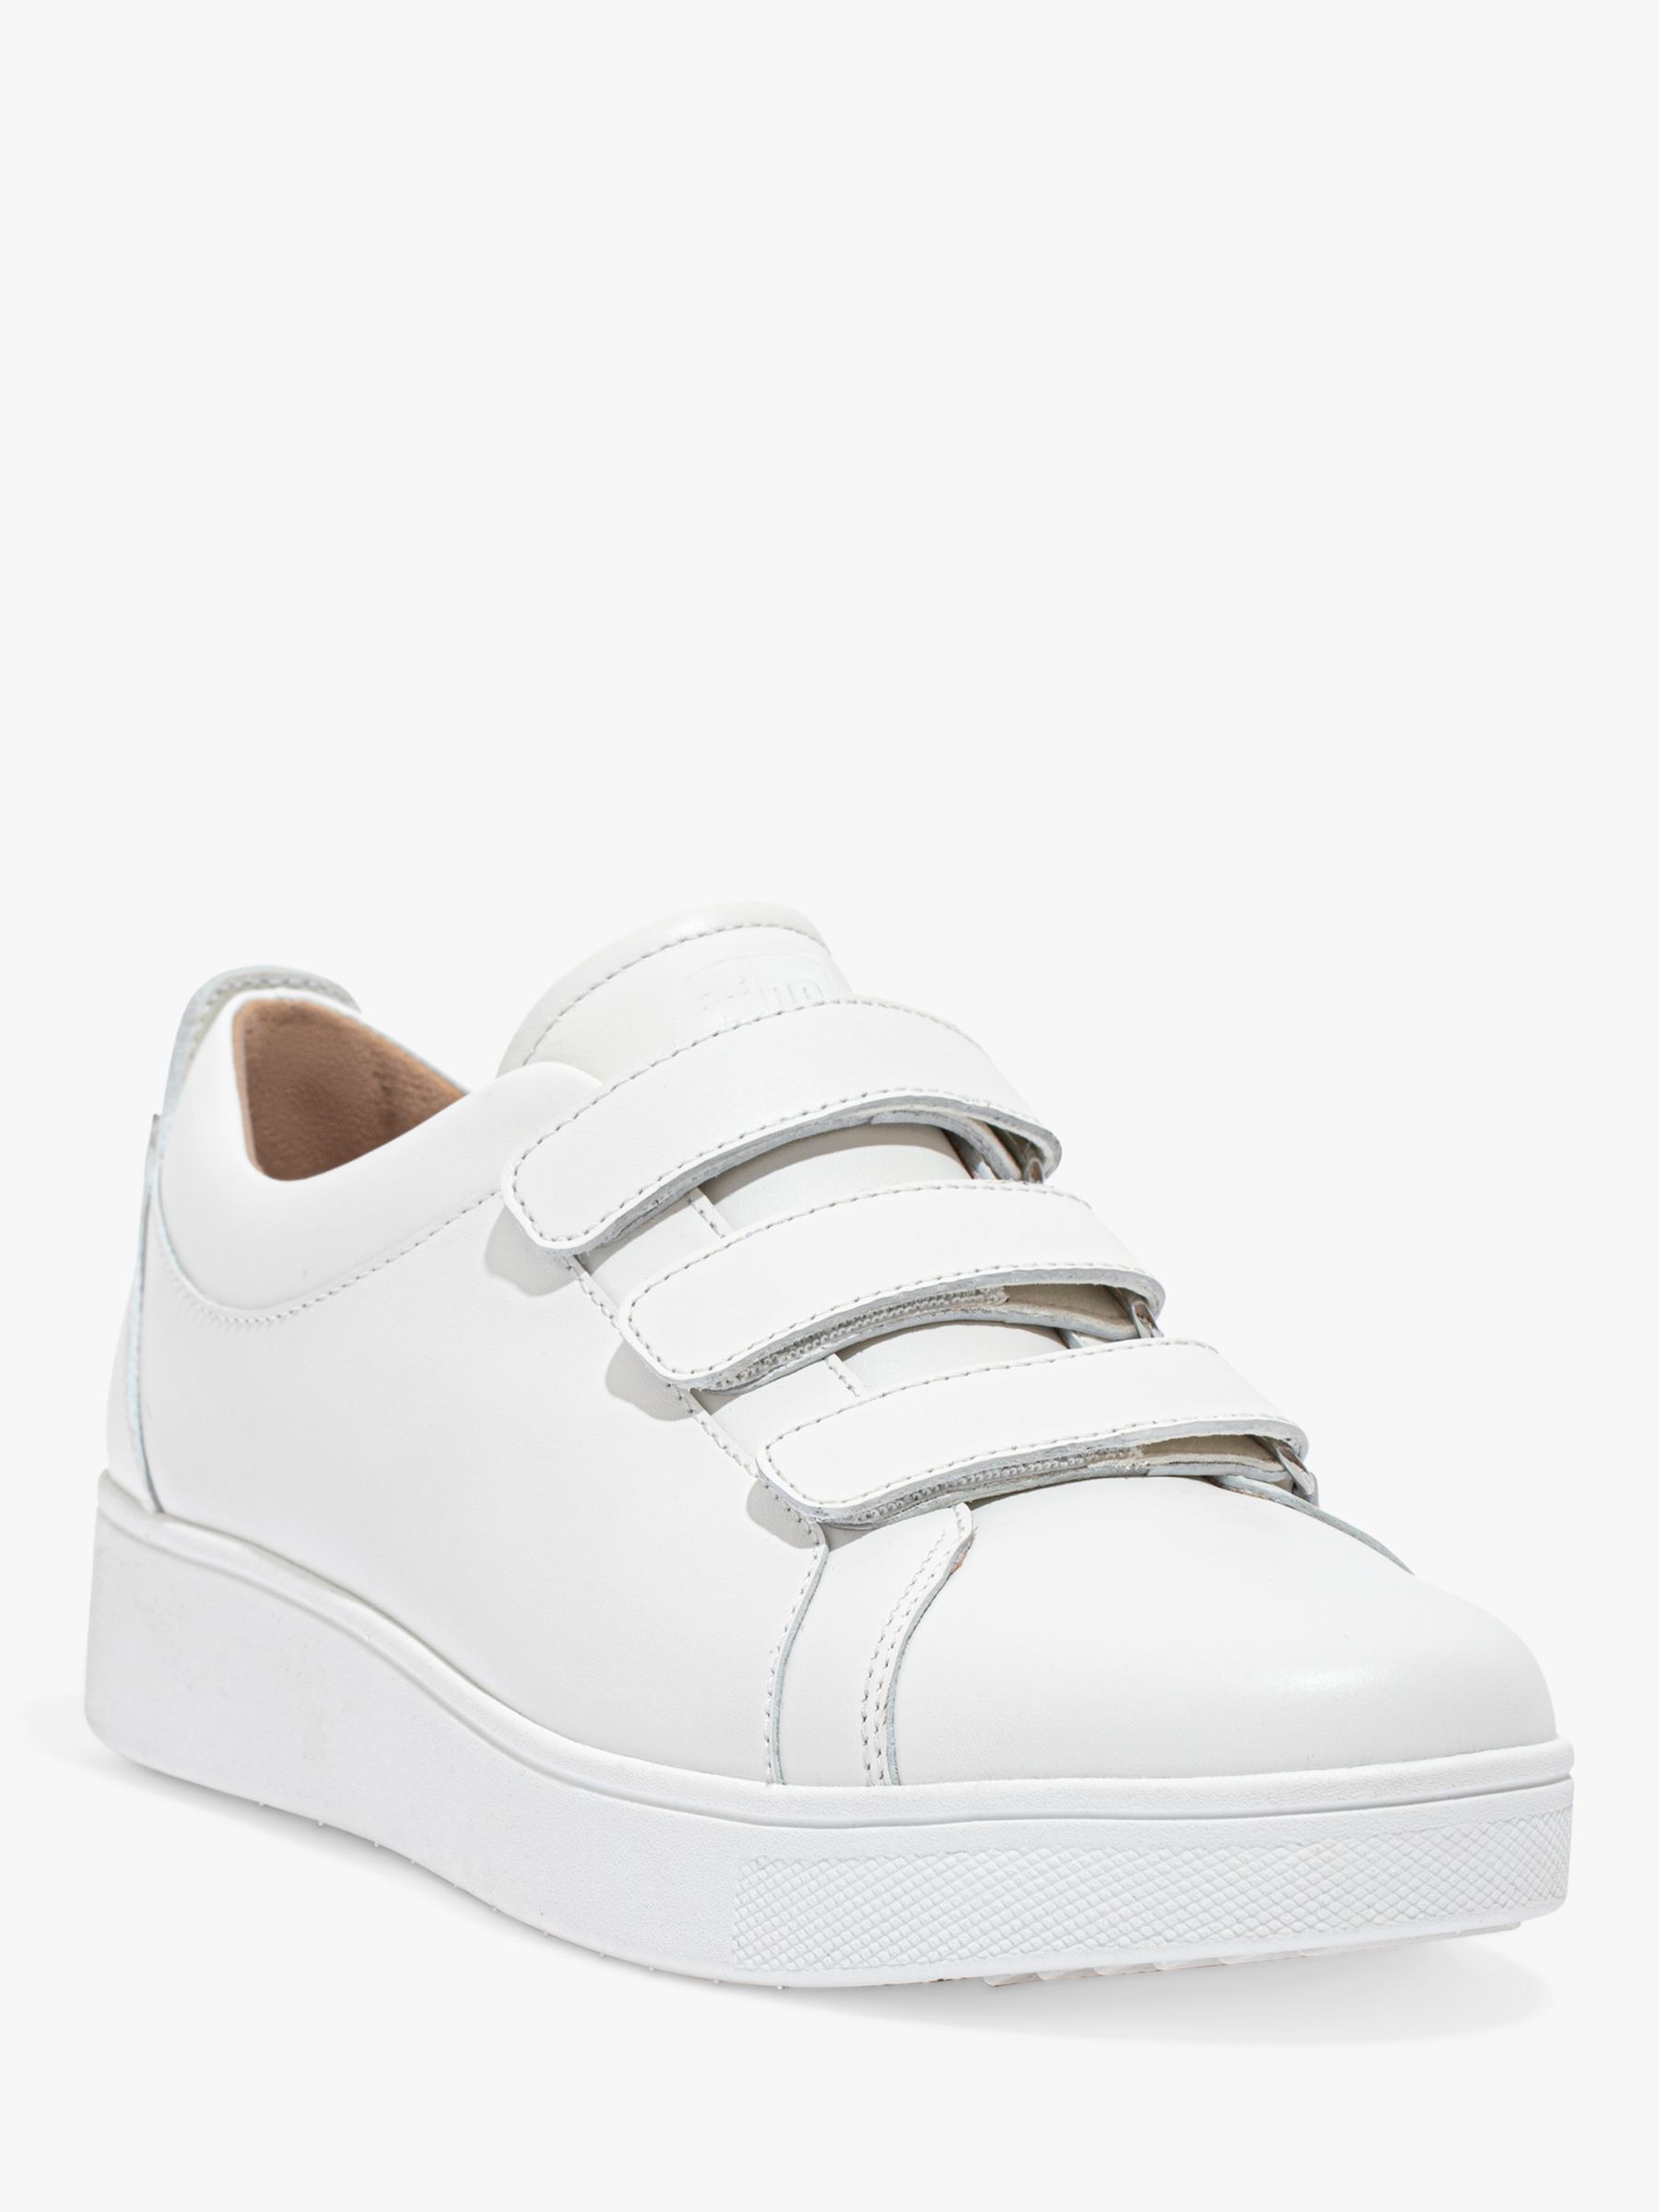 FitFlop Rally Strap Leather Trainers, Urban White, 8